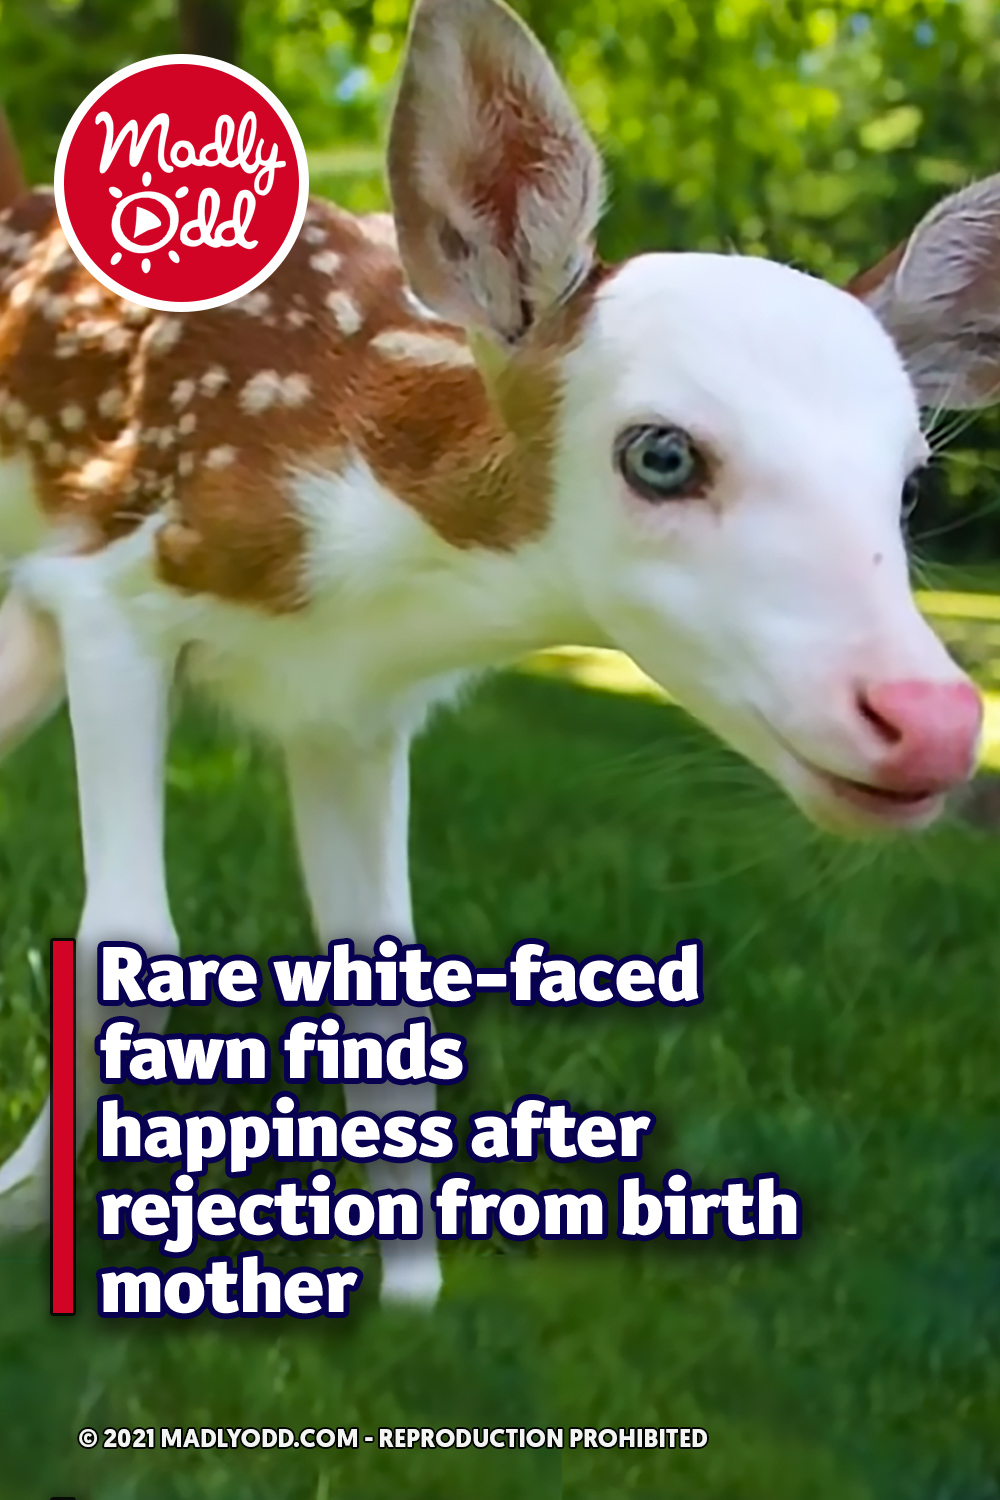 Rare white-faced fawn finds happiness after rejection from birth mother